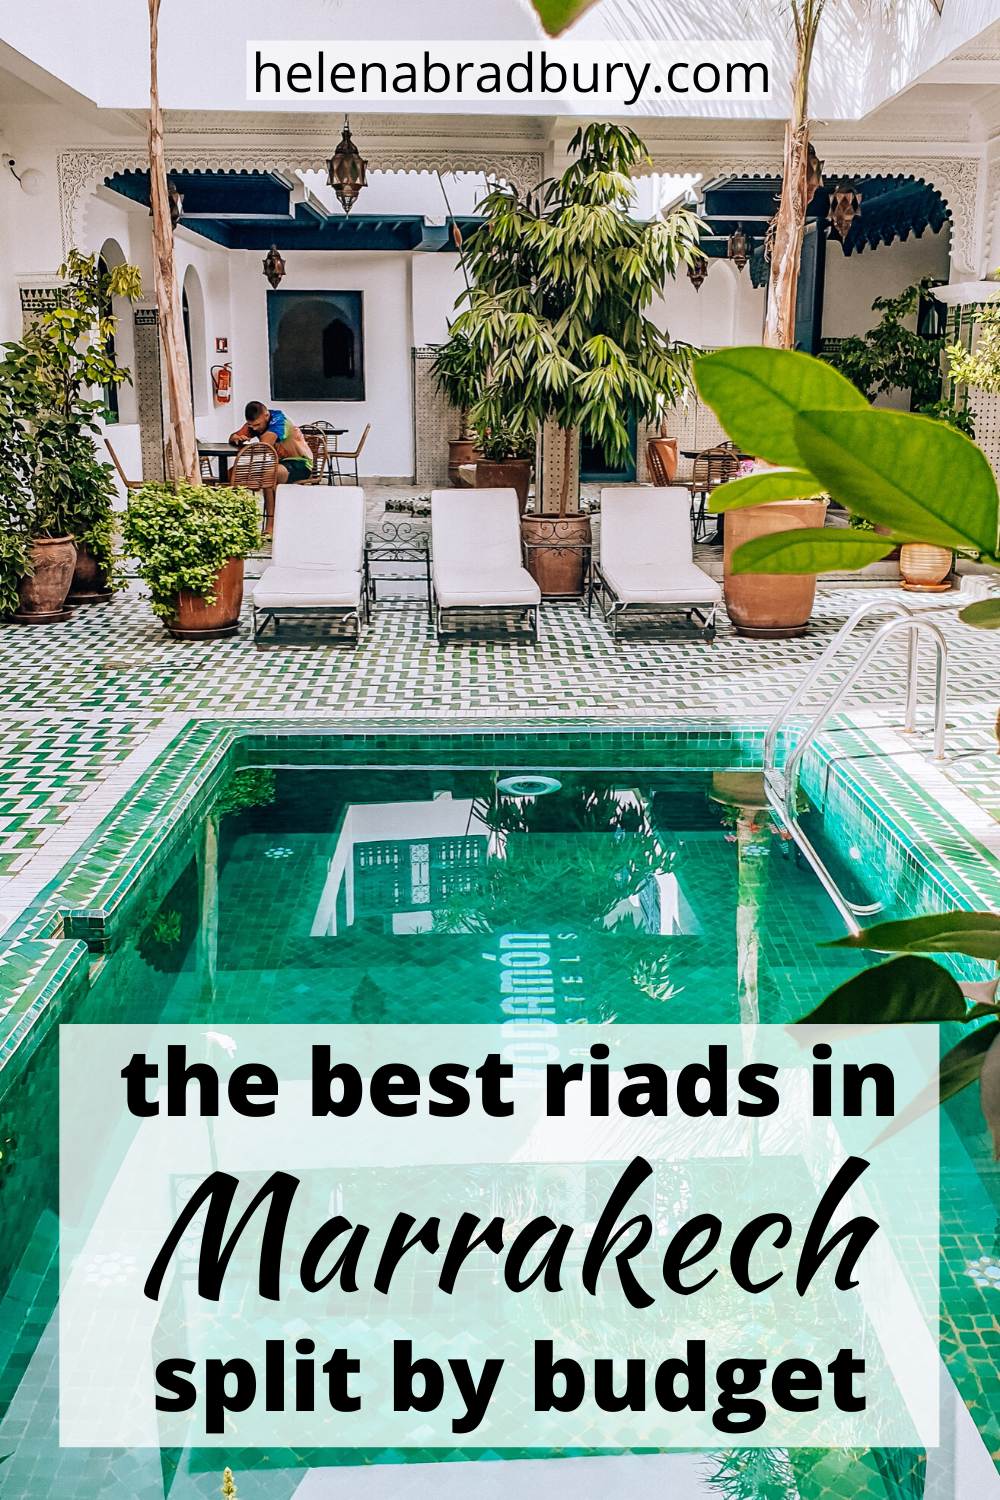 How to pick the best riad to stay at in Marrakech (split by budget) | Helena Bradbury Travel Blog | Best riads in Marrakech | Best riad in Marrakech | best places to stay in Marrakech | where to stay Marrakech | Marrakech Travel tips | Marrakech ria…